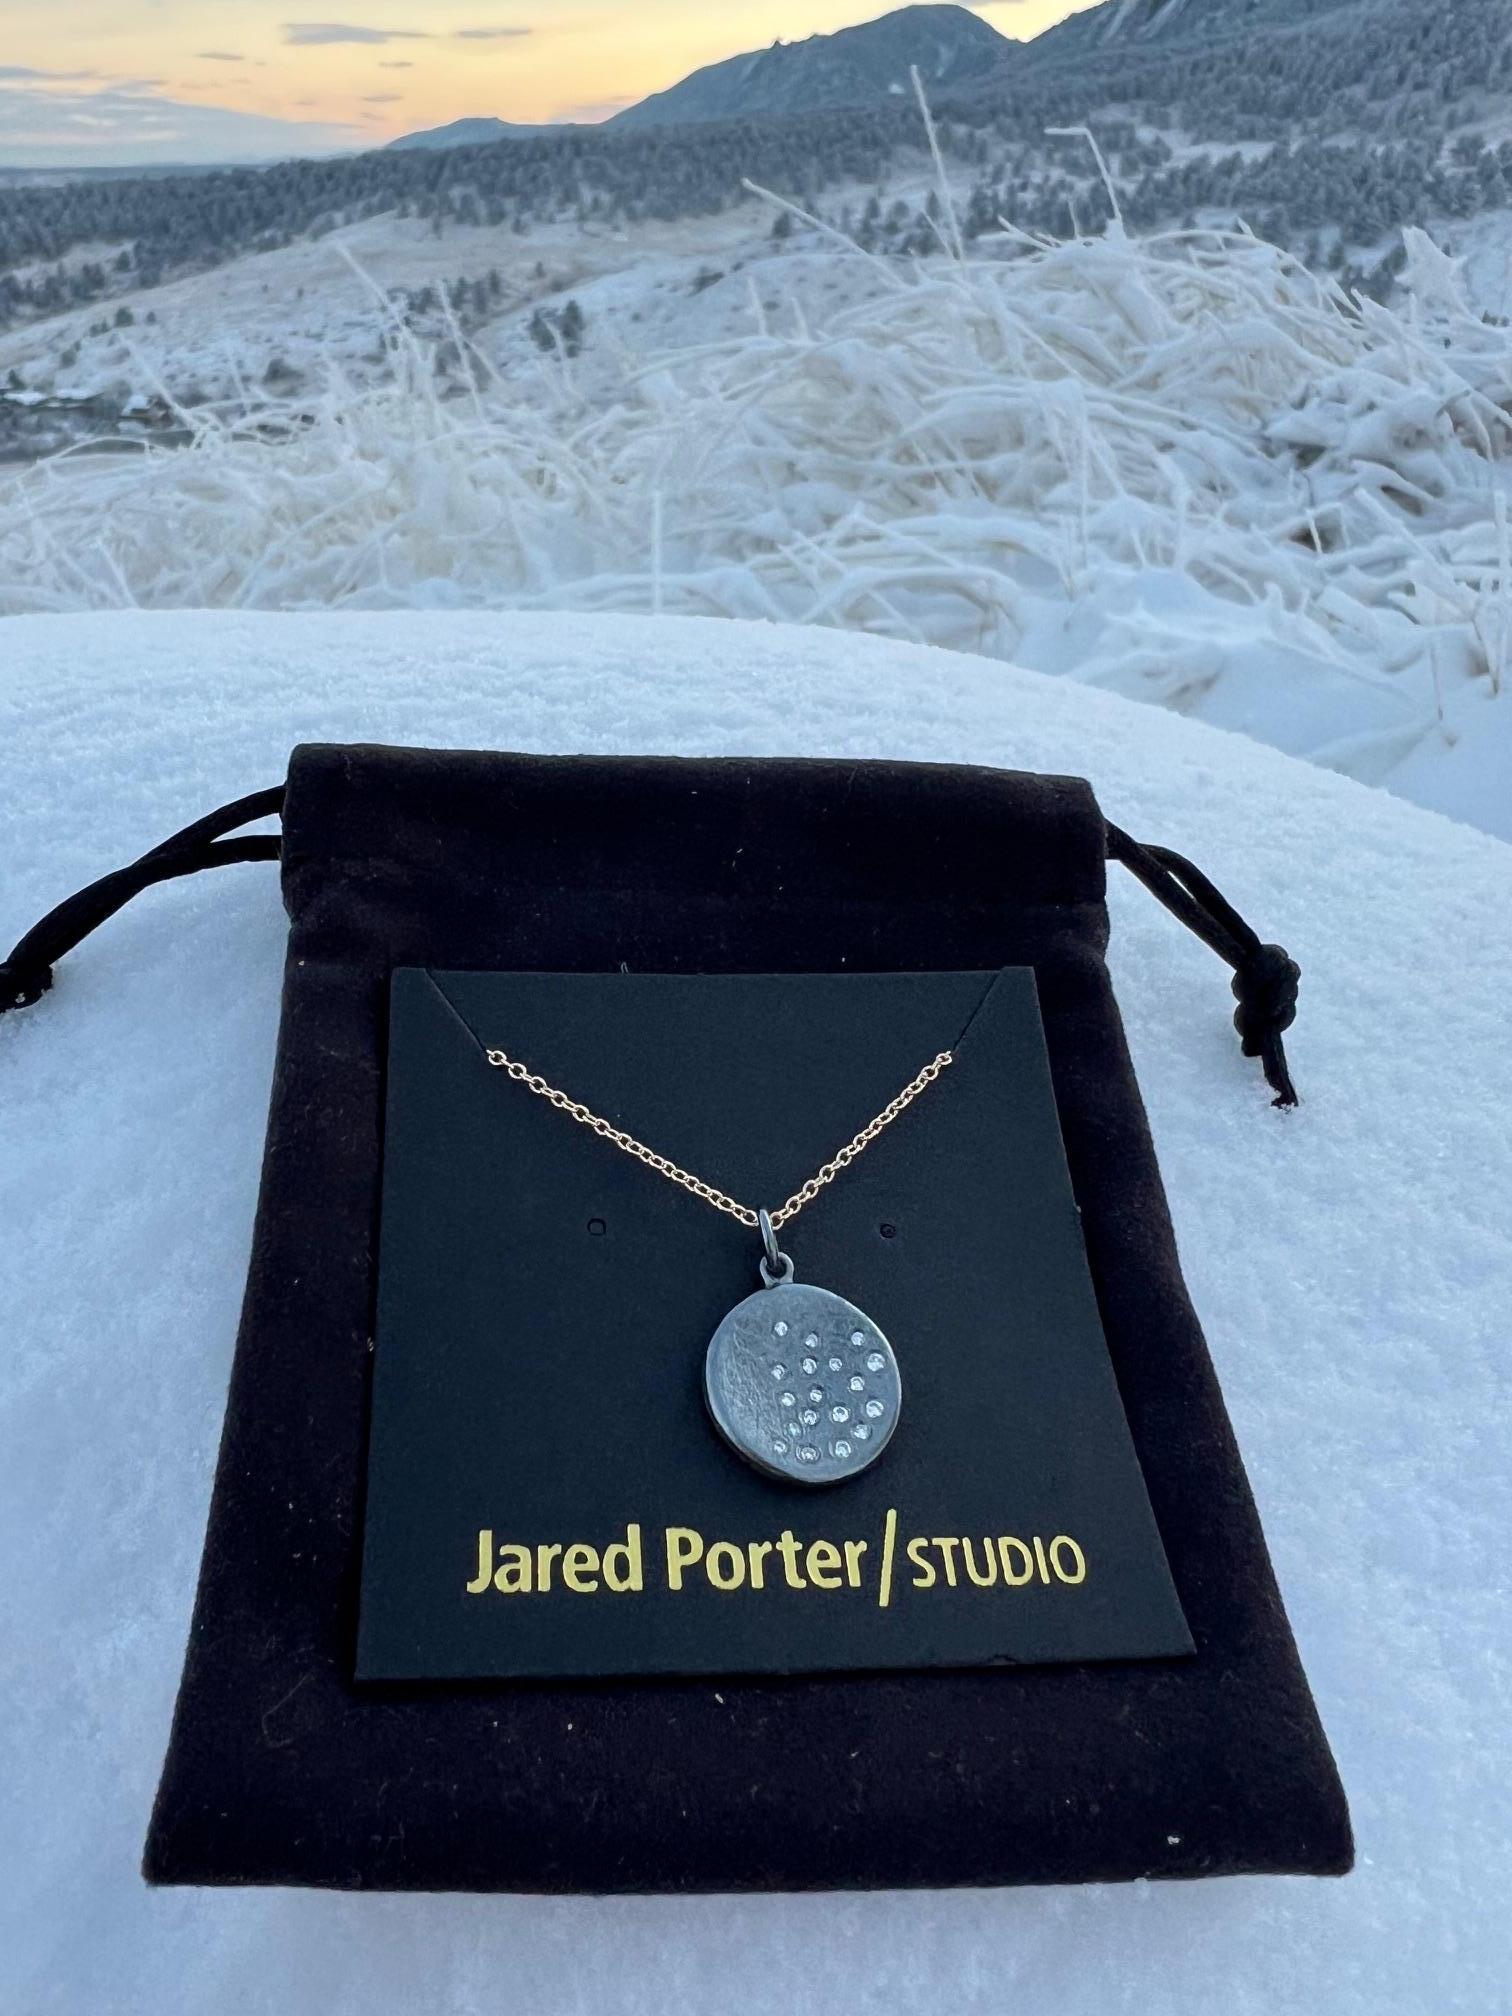 Beautiful pendant hand fabricated by Jared Porter Studio.

The inspiration behind this every day wearing necklace was to give the feeling of snowfall or a bright starry nights sky.  

The disc is sterling silver with a dark patina (oxidized) finish